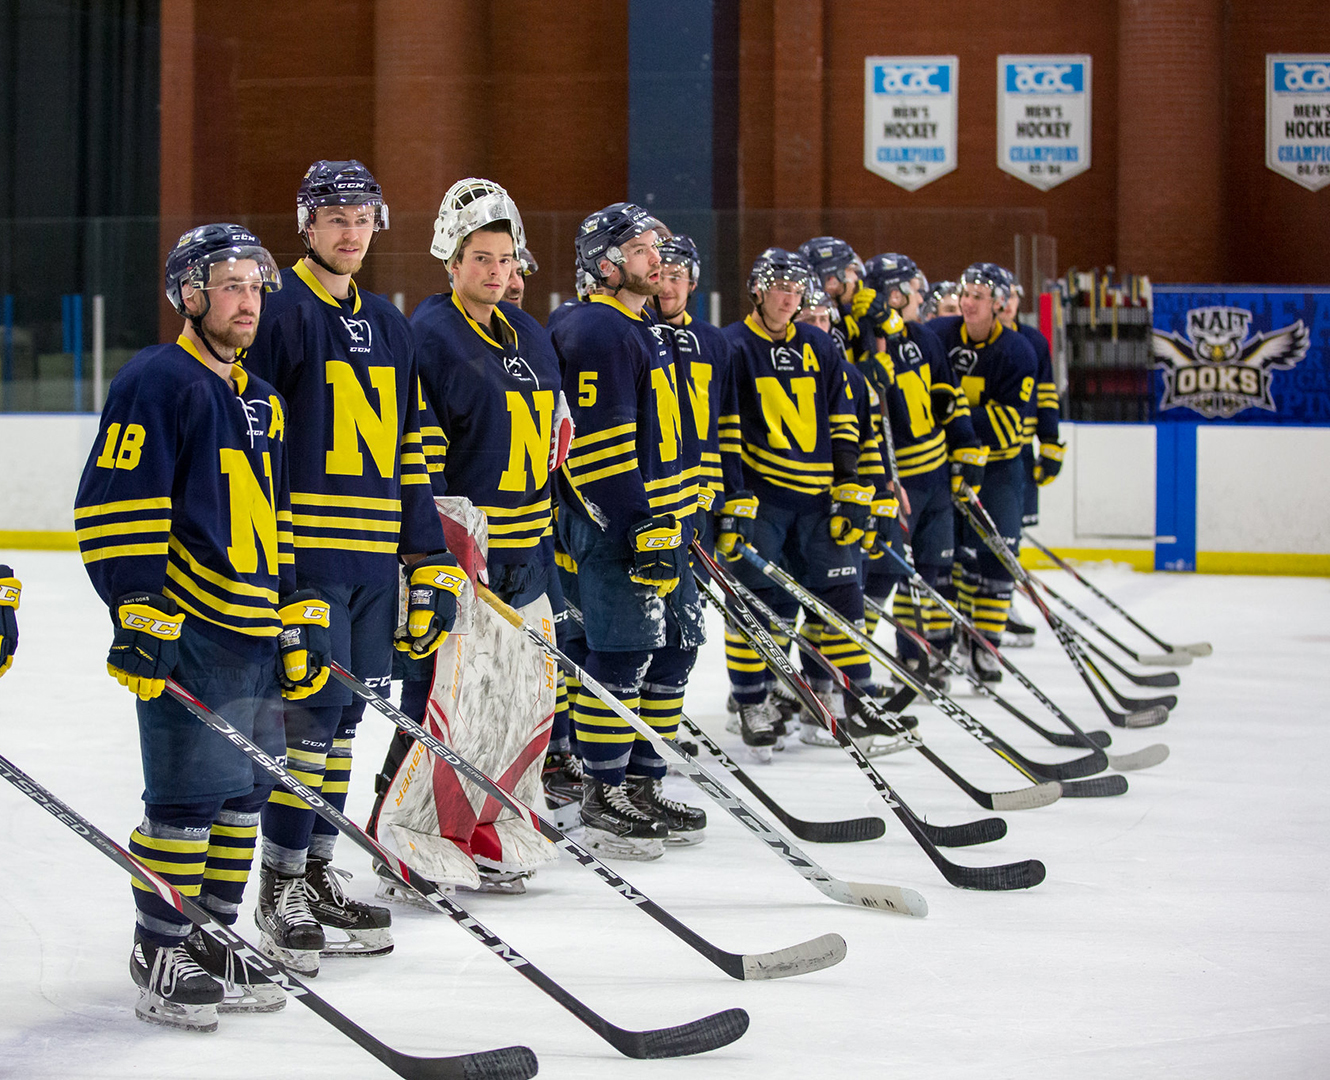 NAIT Men's hockey team line up in arena before a game